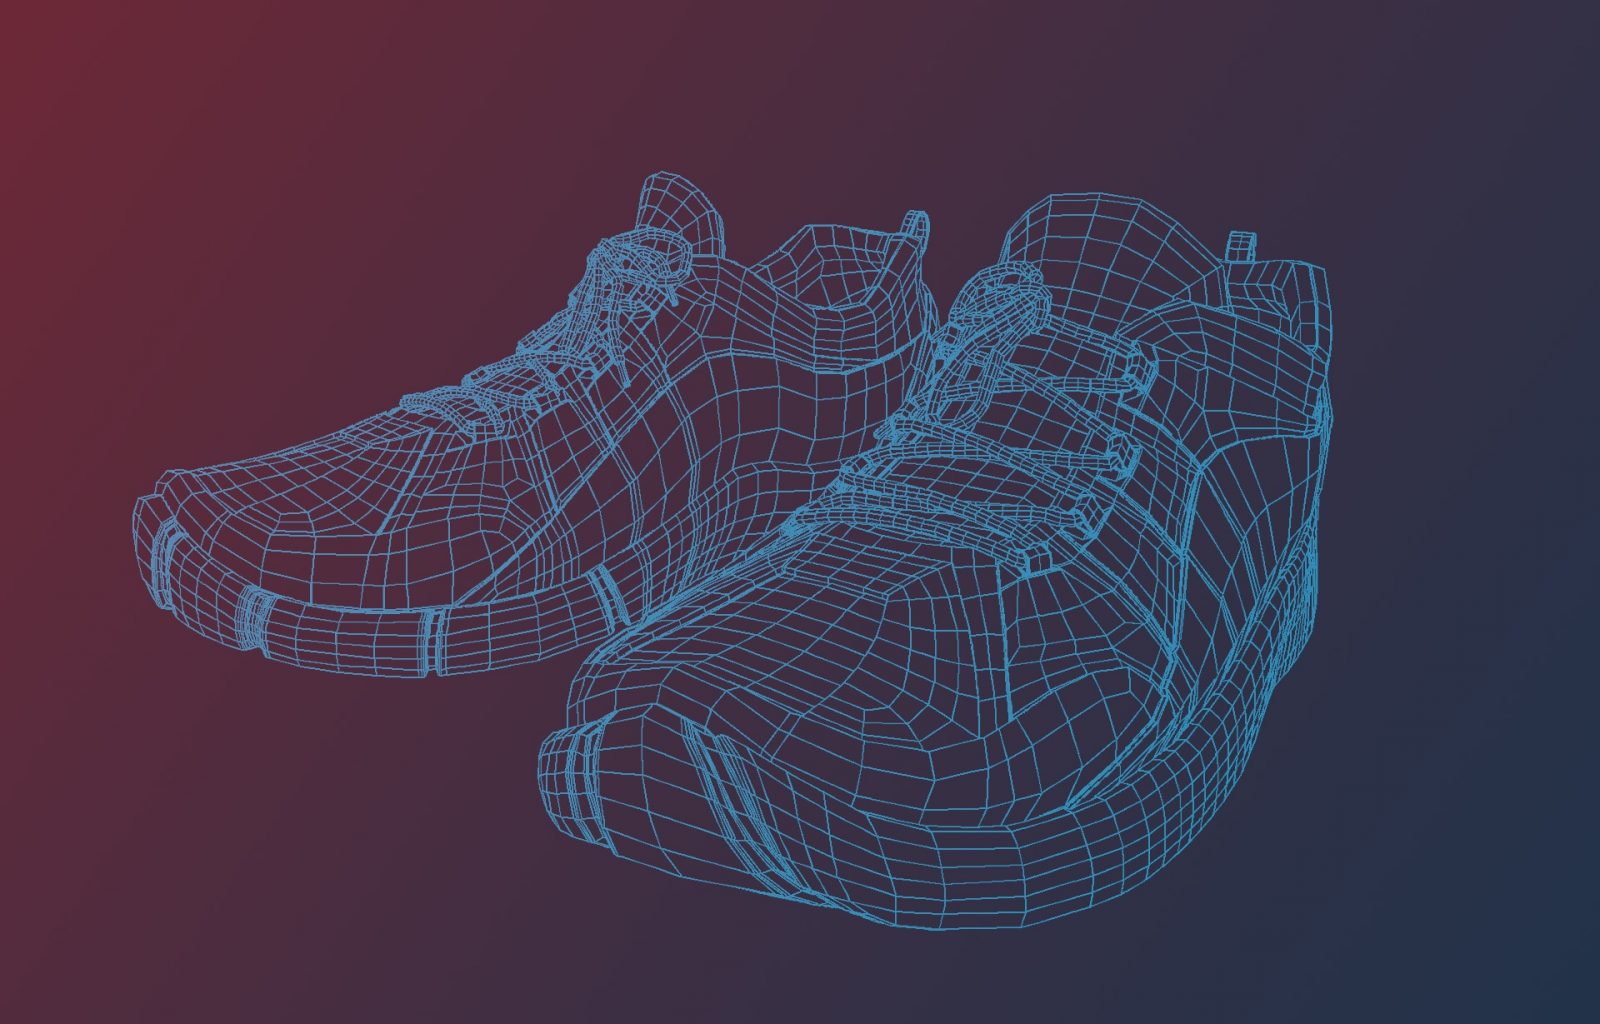 Background image: Shoes01 Wireframe01 1